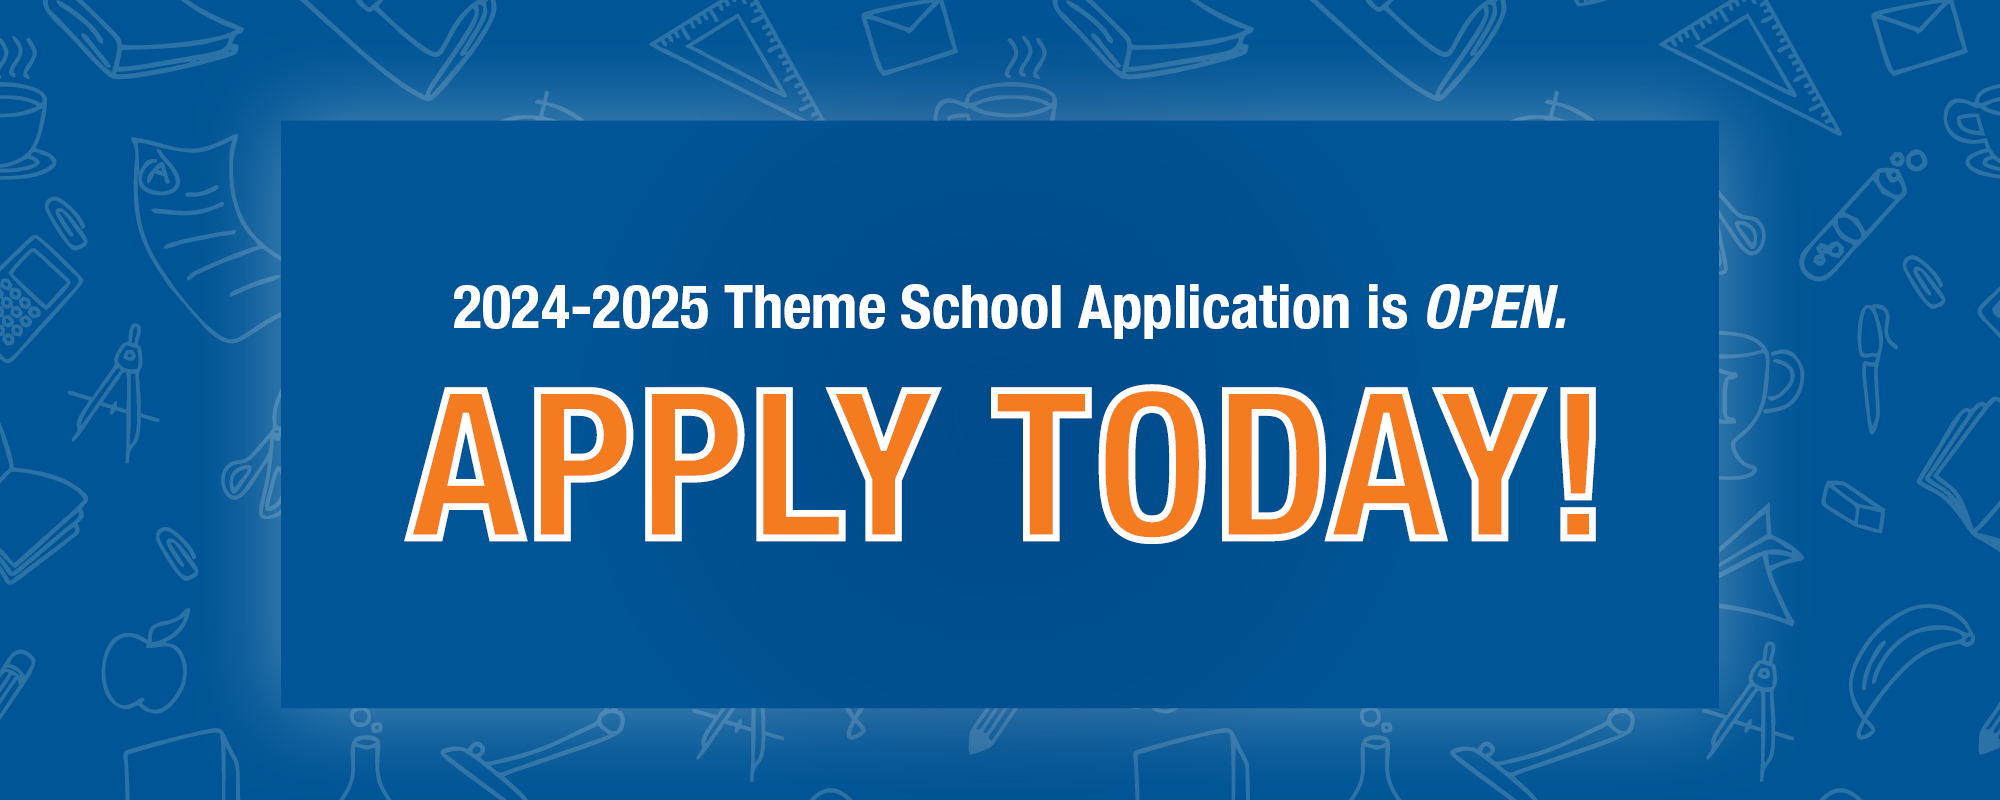 2024-2025 Theme School Application is OPEN. Apply Today!